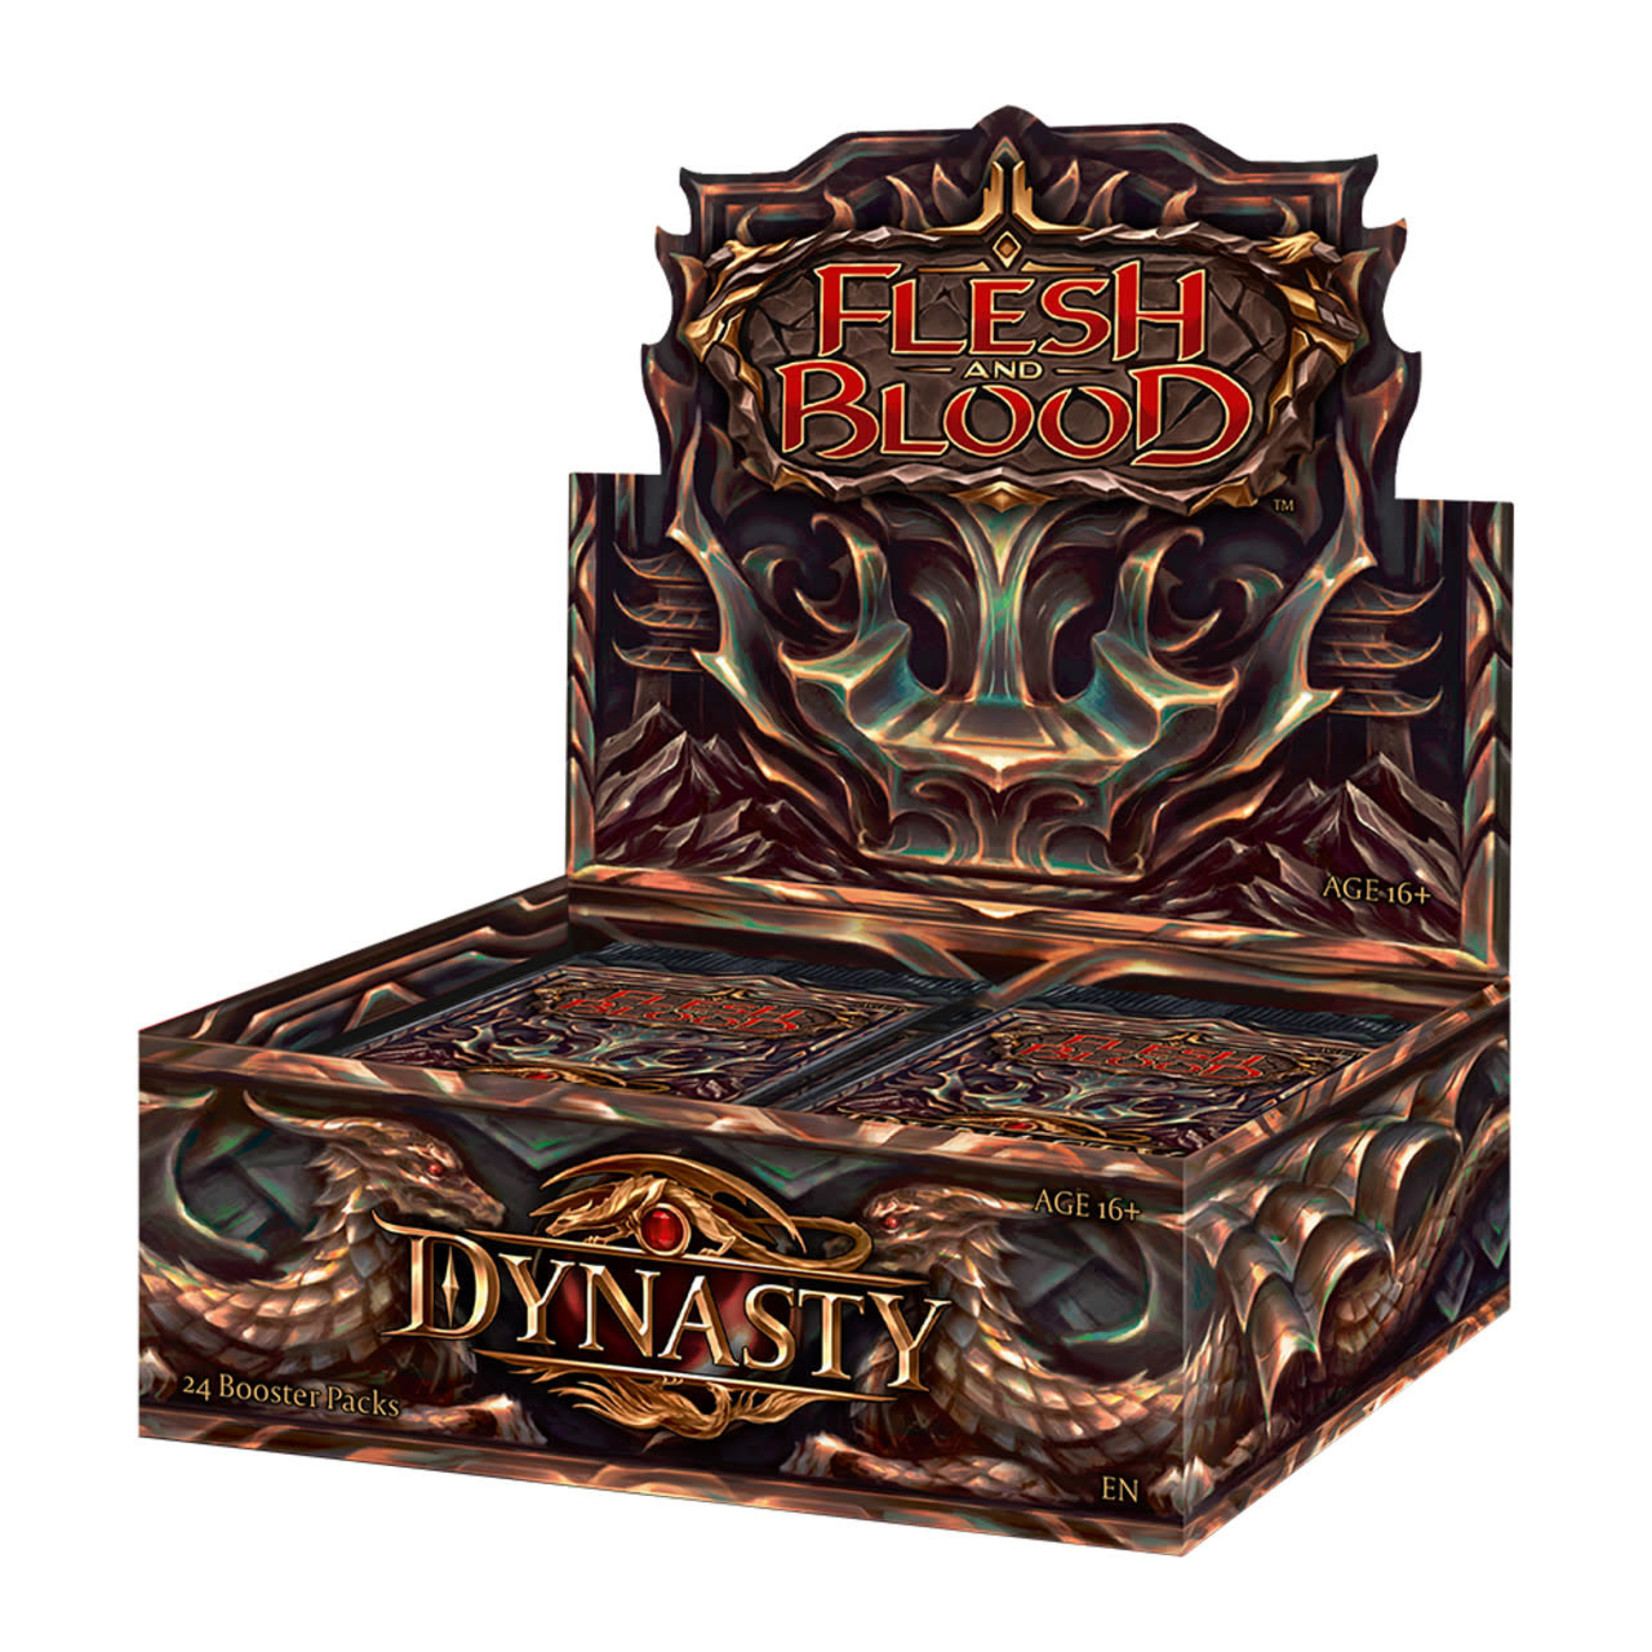 Legend Story Studios Flesh and Blood - Dynasty Booster Box